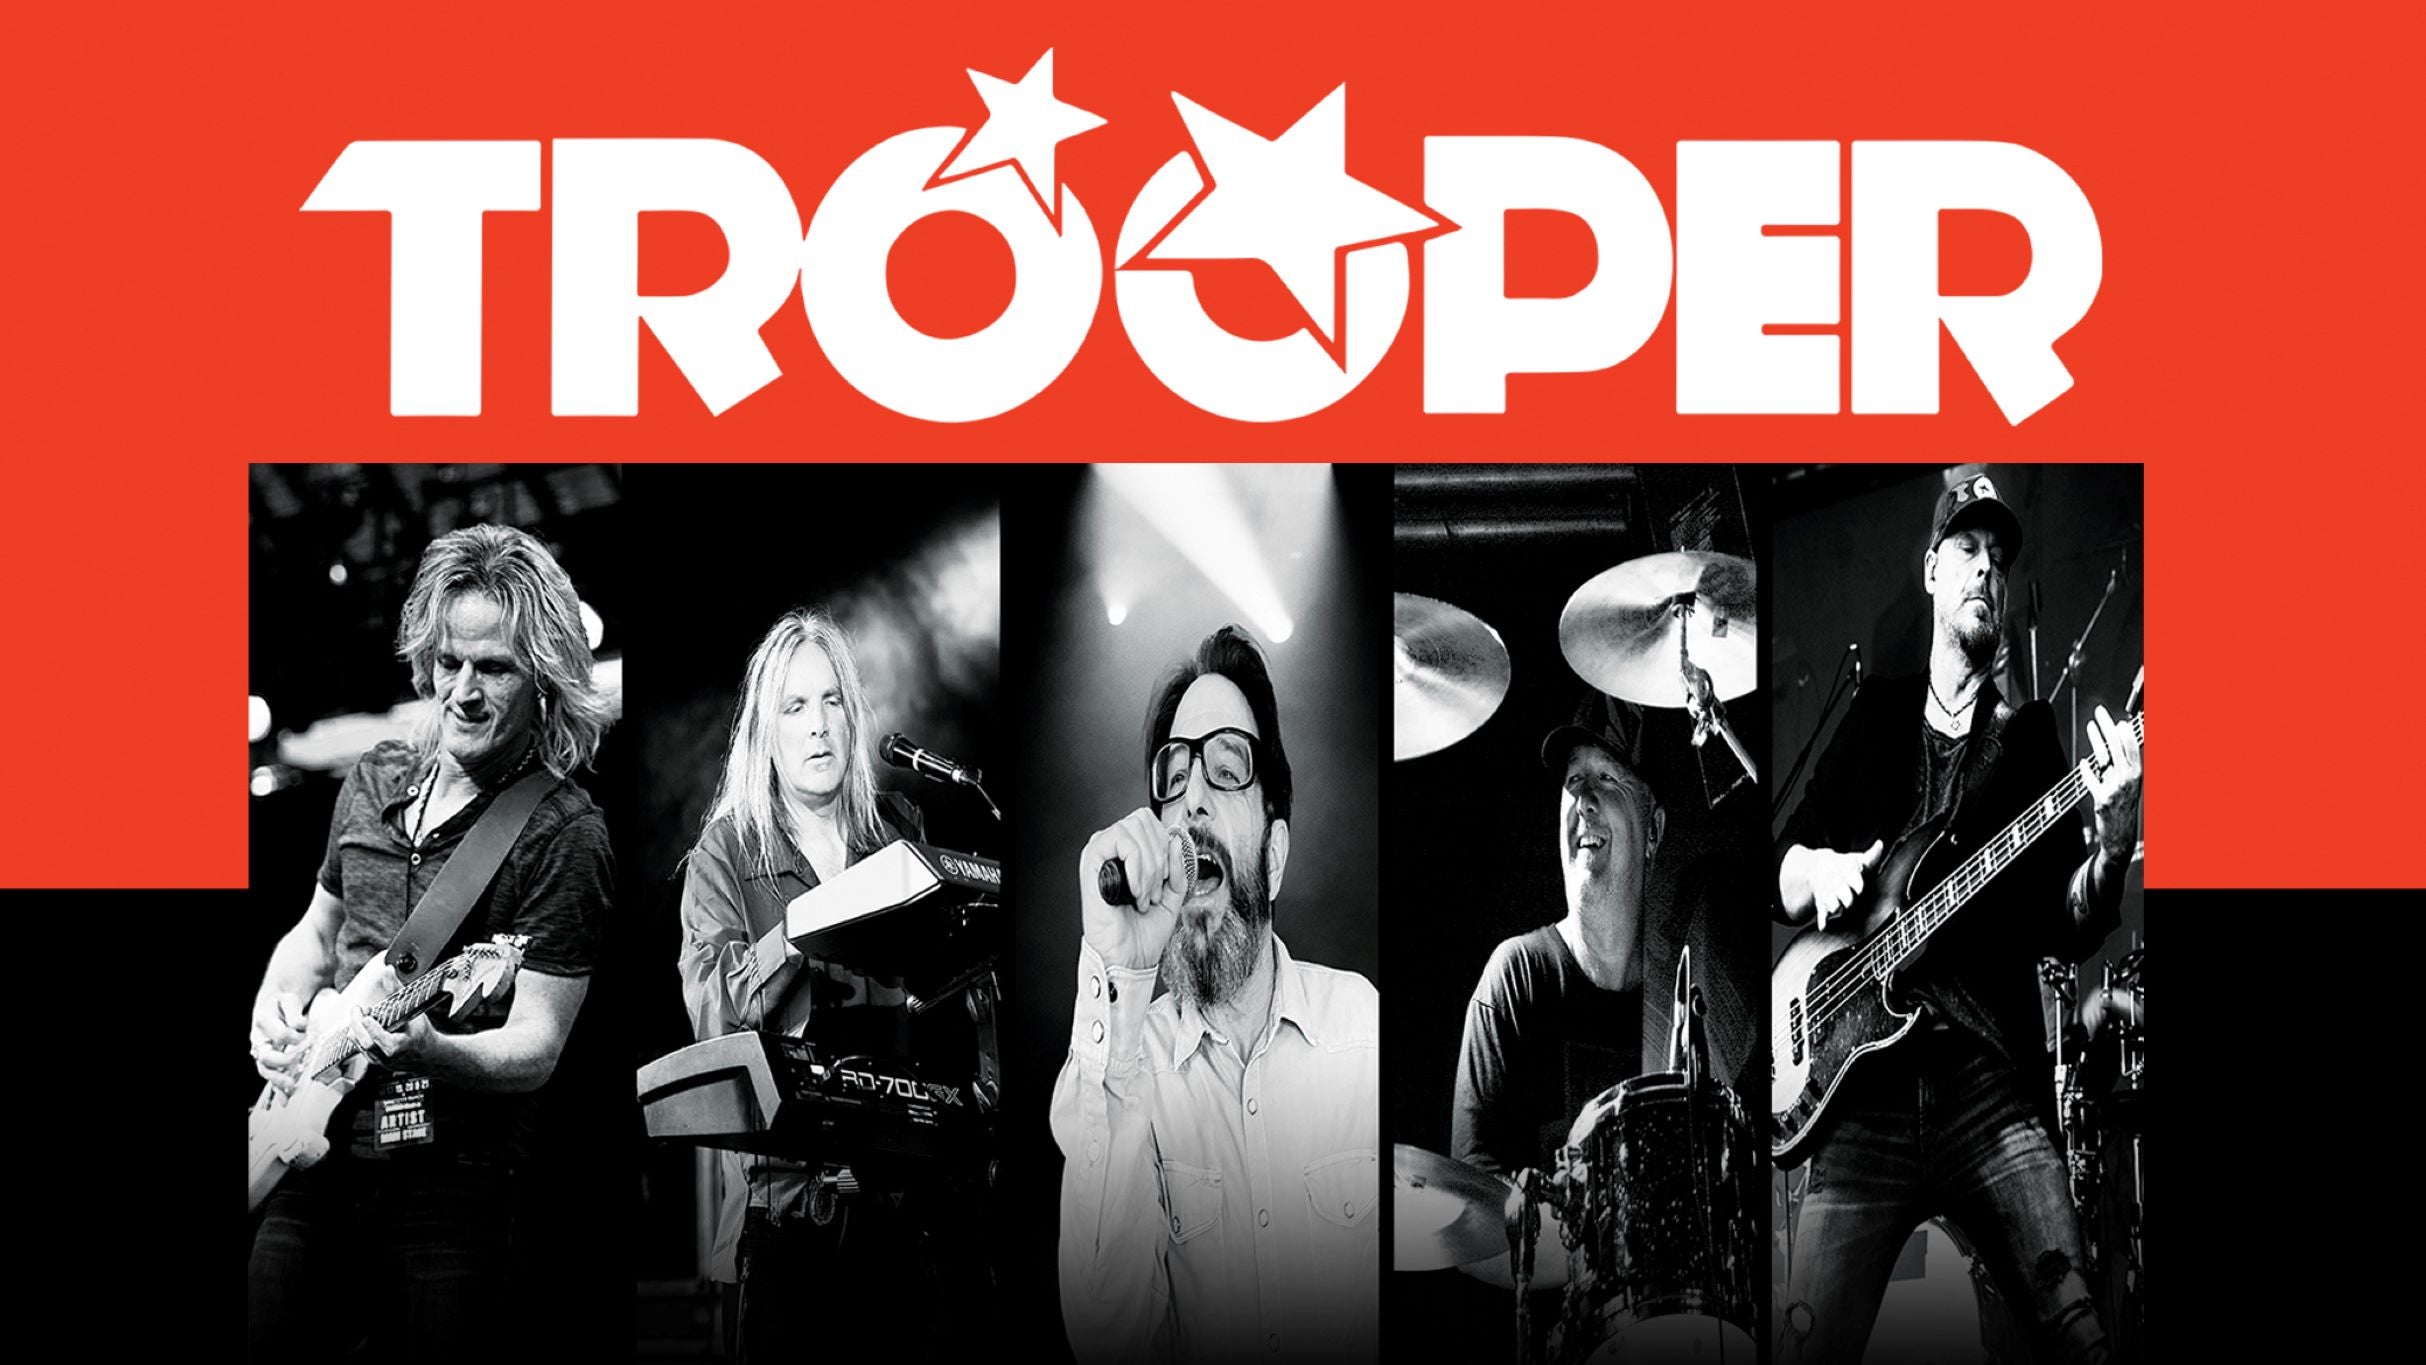 presale password to Trooper tickets in Calgary at Grey Eagle Event Centre